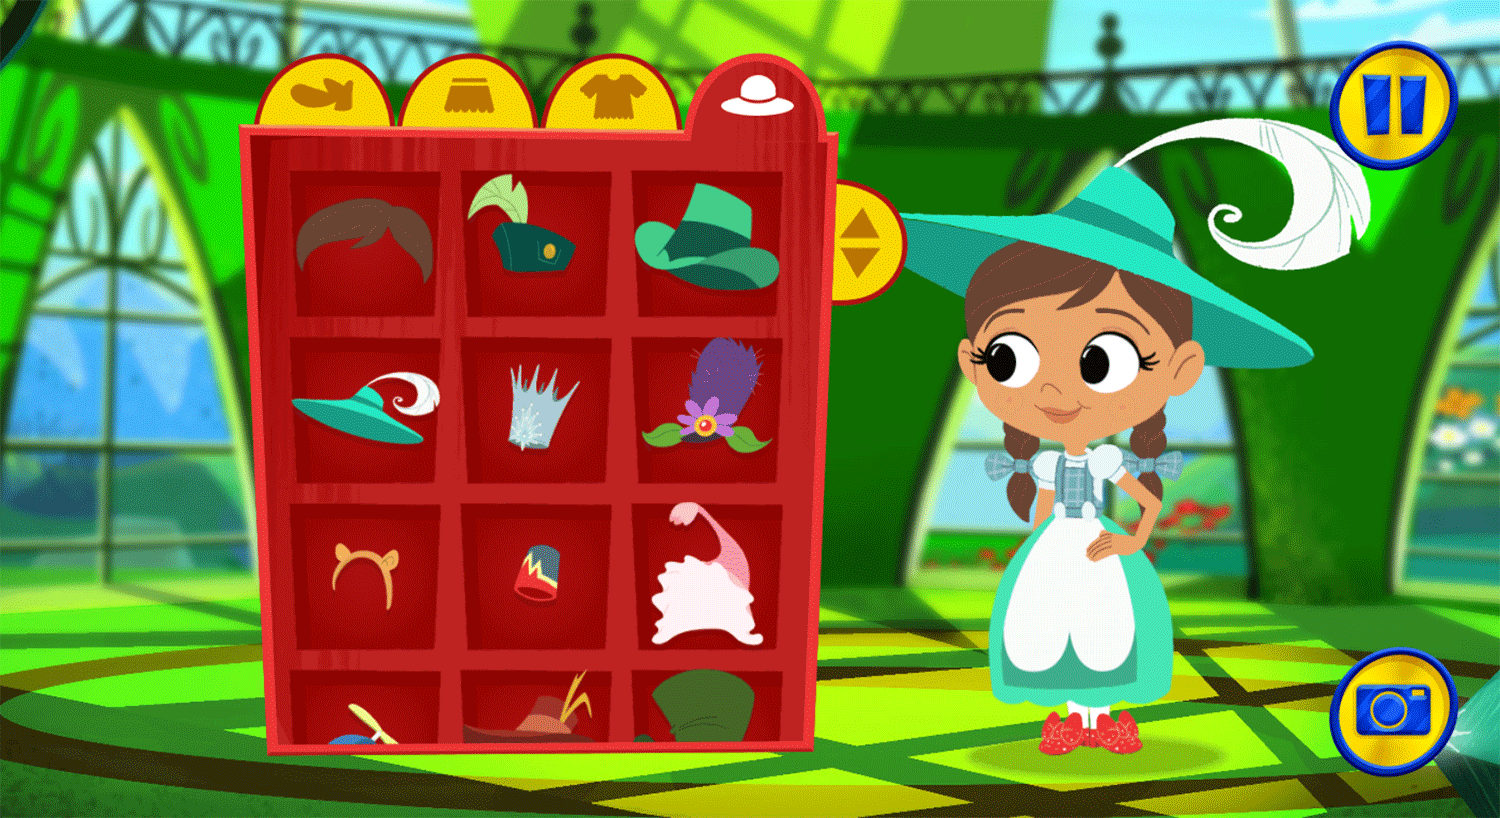 Dorothy and the Wizard of Oz Dress Up Game Dressed Model Screenshot.